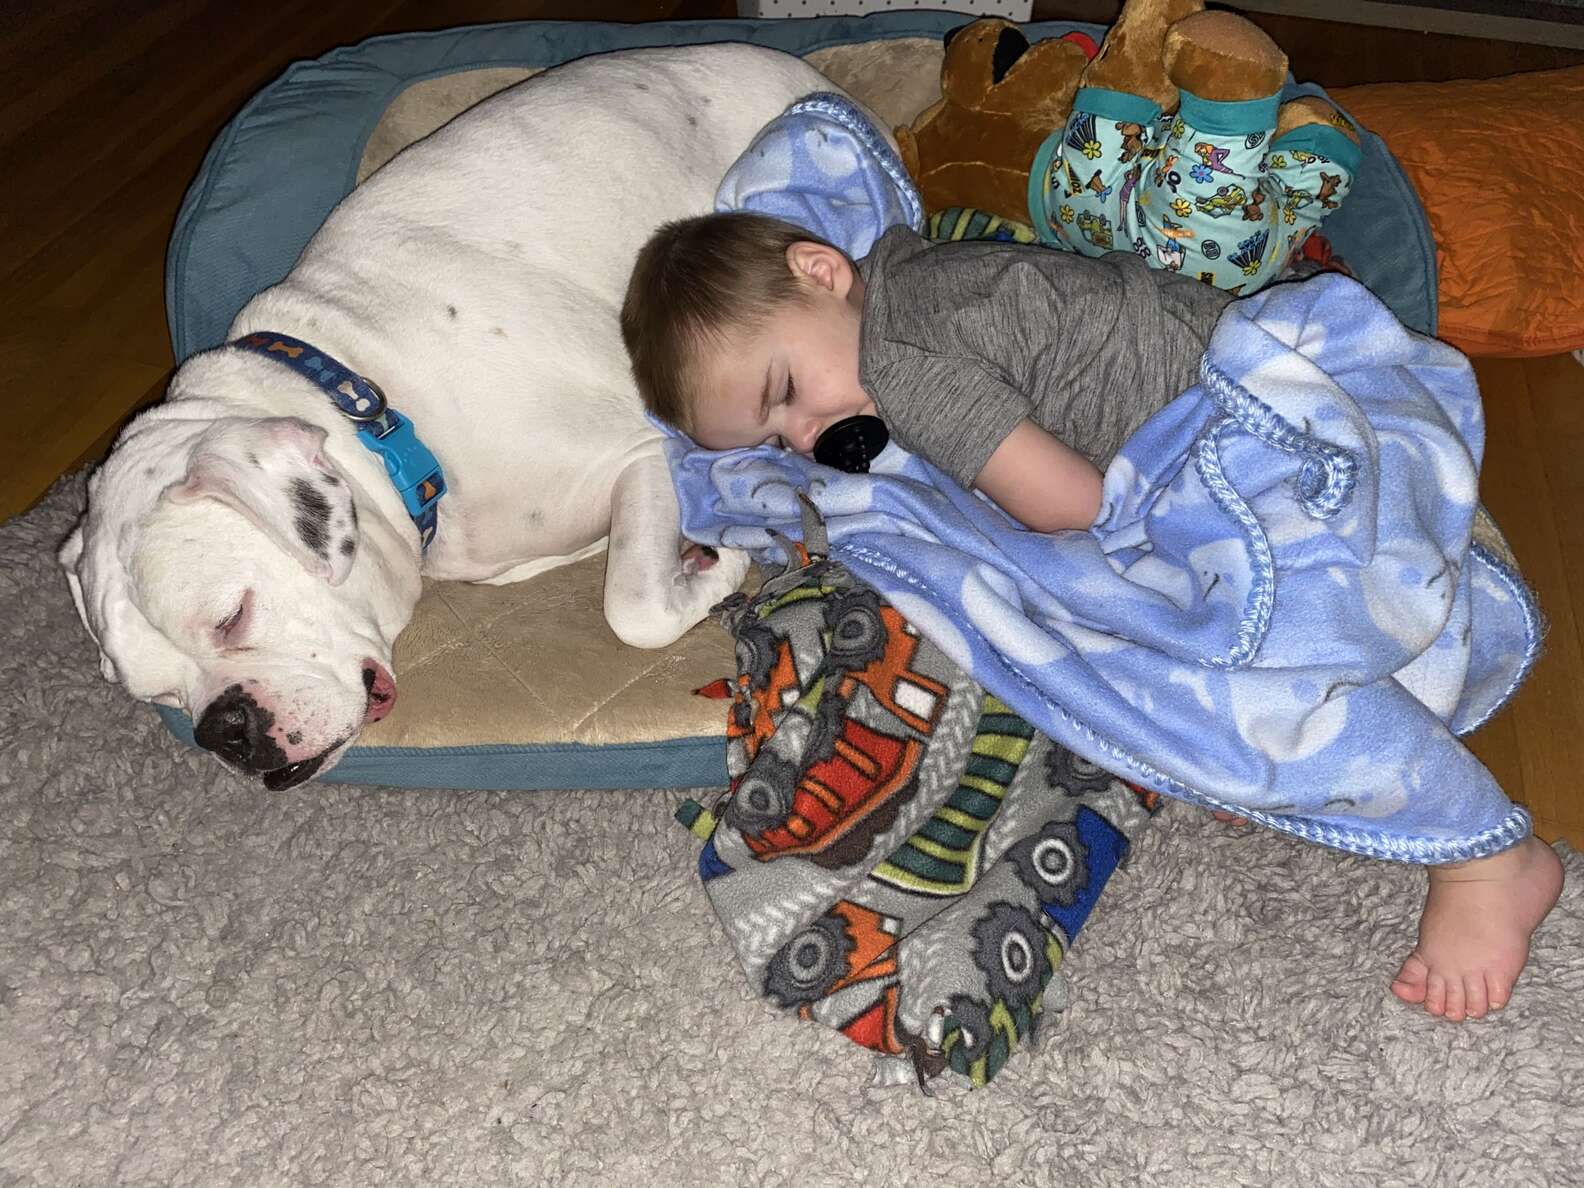 A heartwarming scene: a 5-year-old boy and his loyal canine friend peacefully sleep together, radiating warmth and affection.